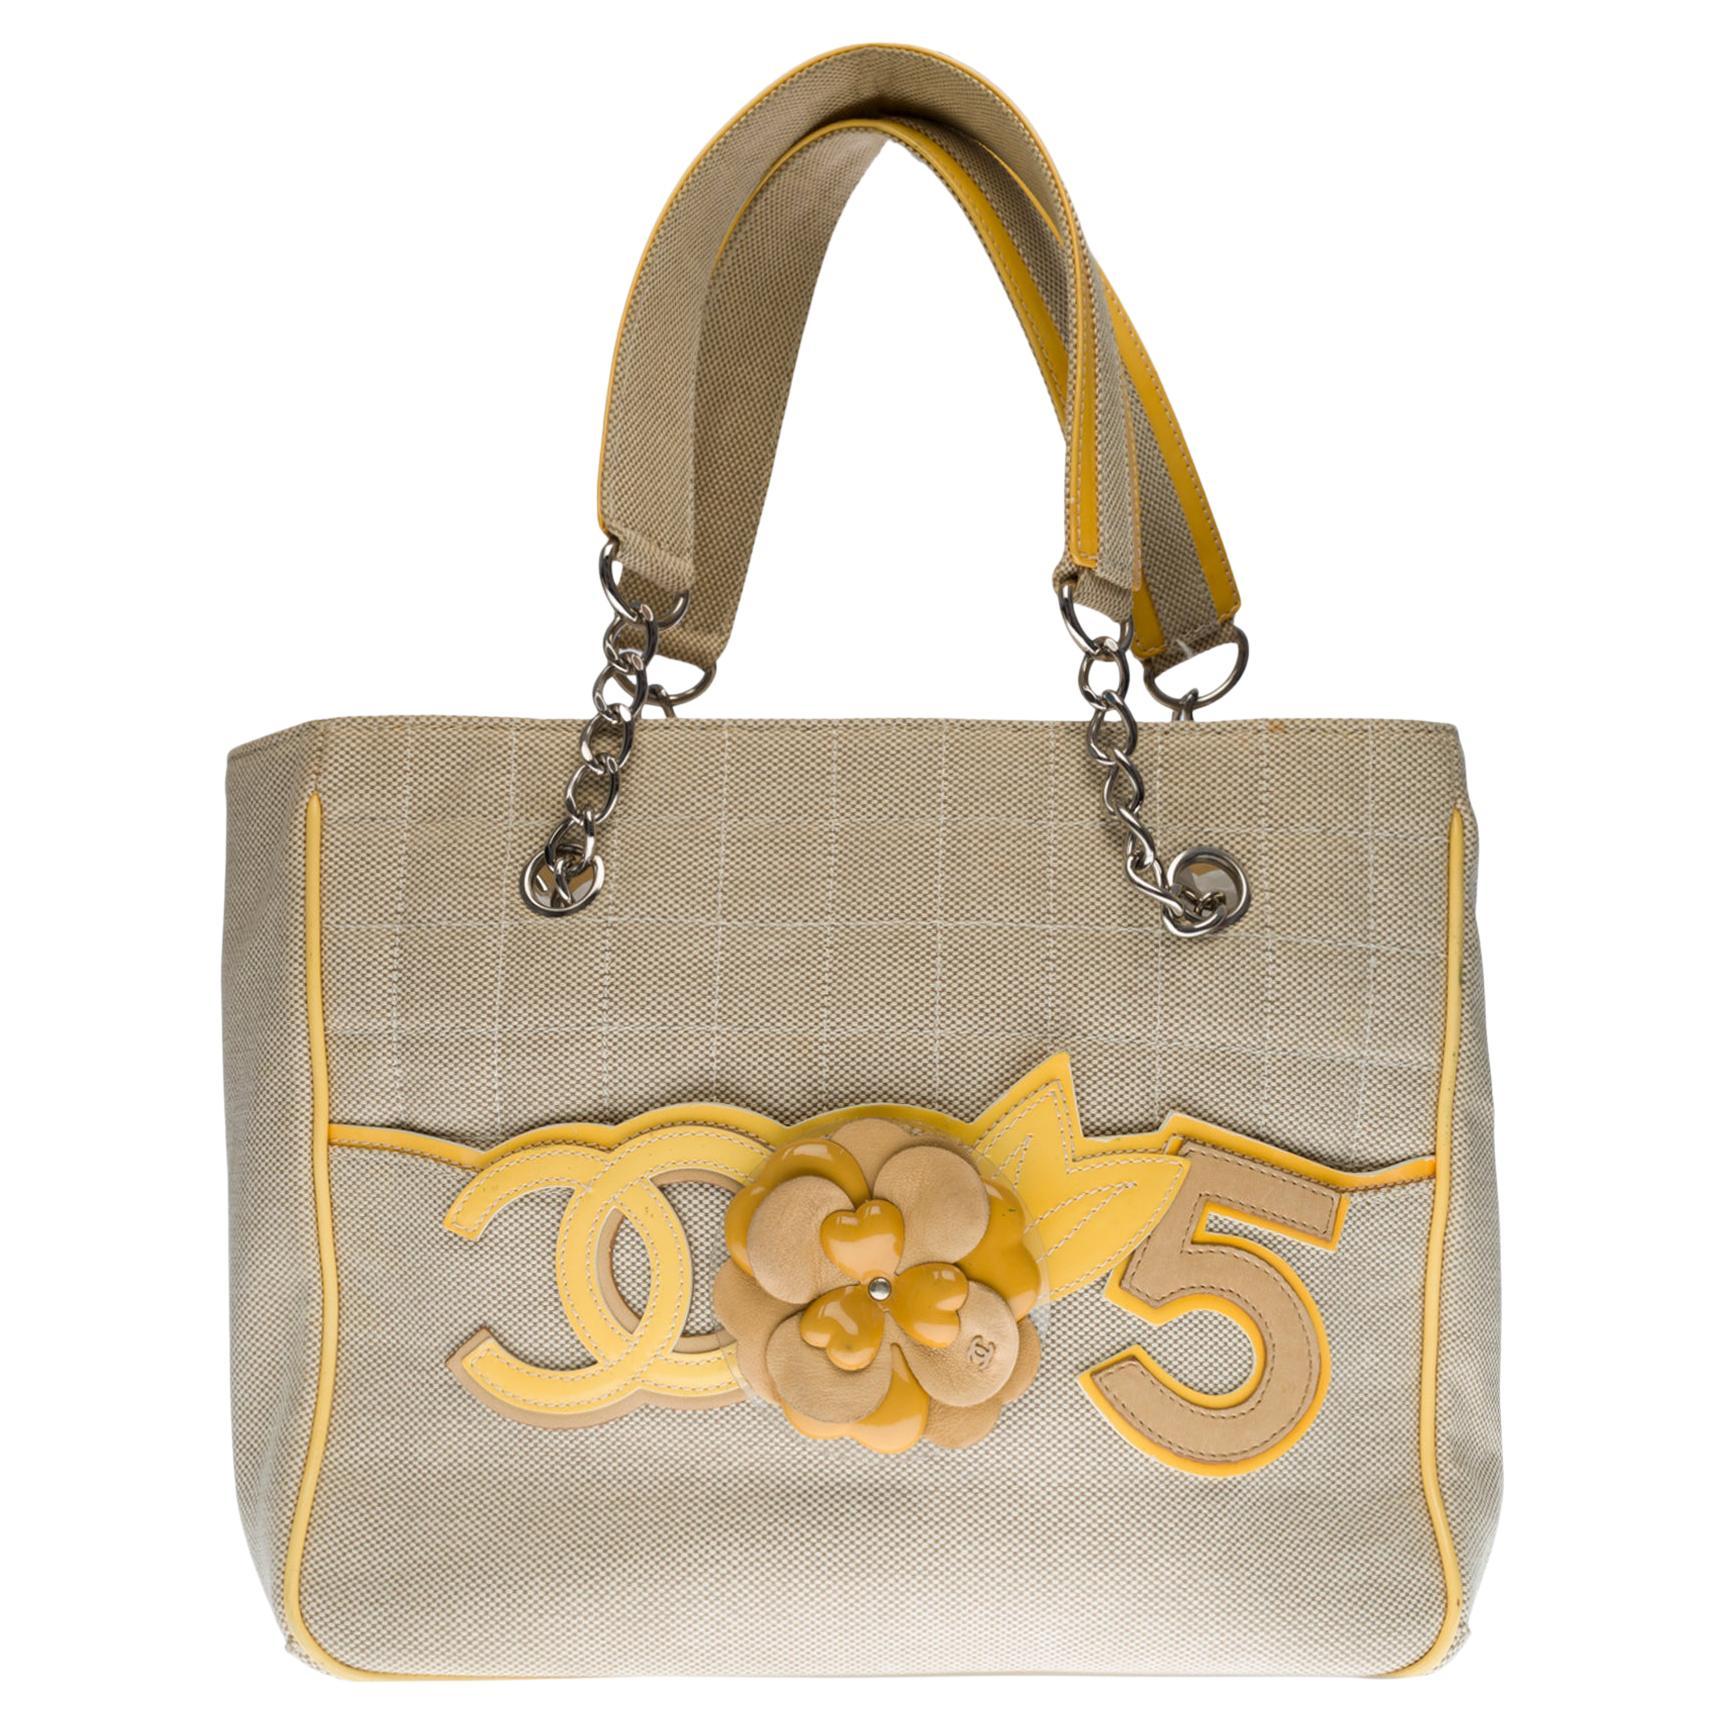 Chanel Camelia bag N°5 Tote bag in beige canvas, SHW at 1stDibs